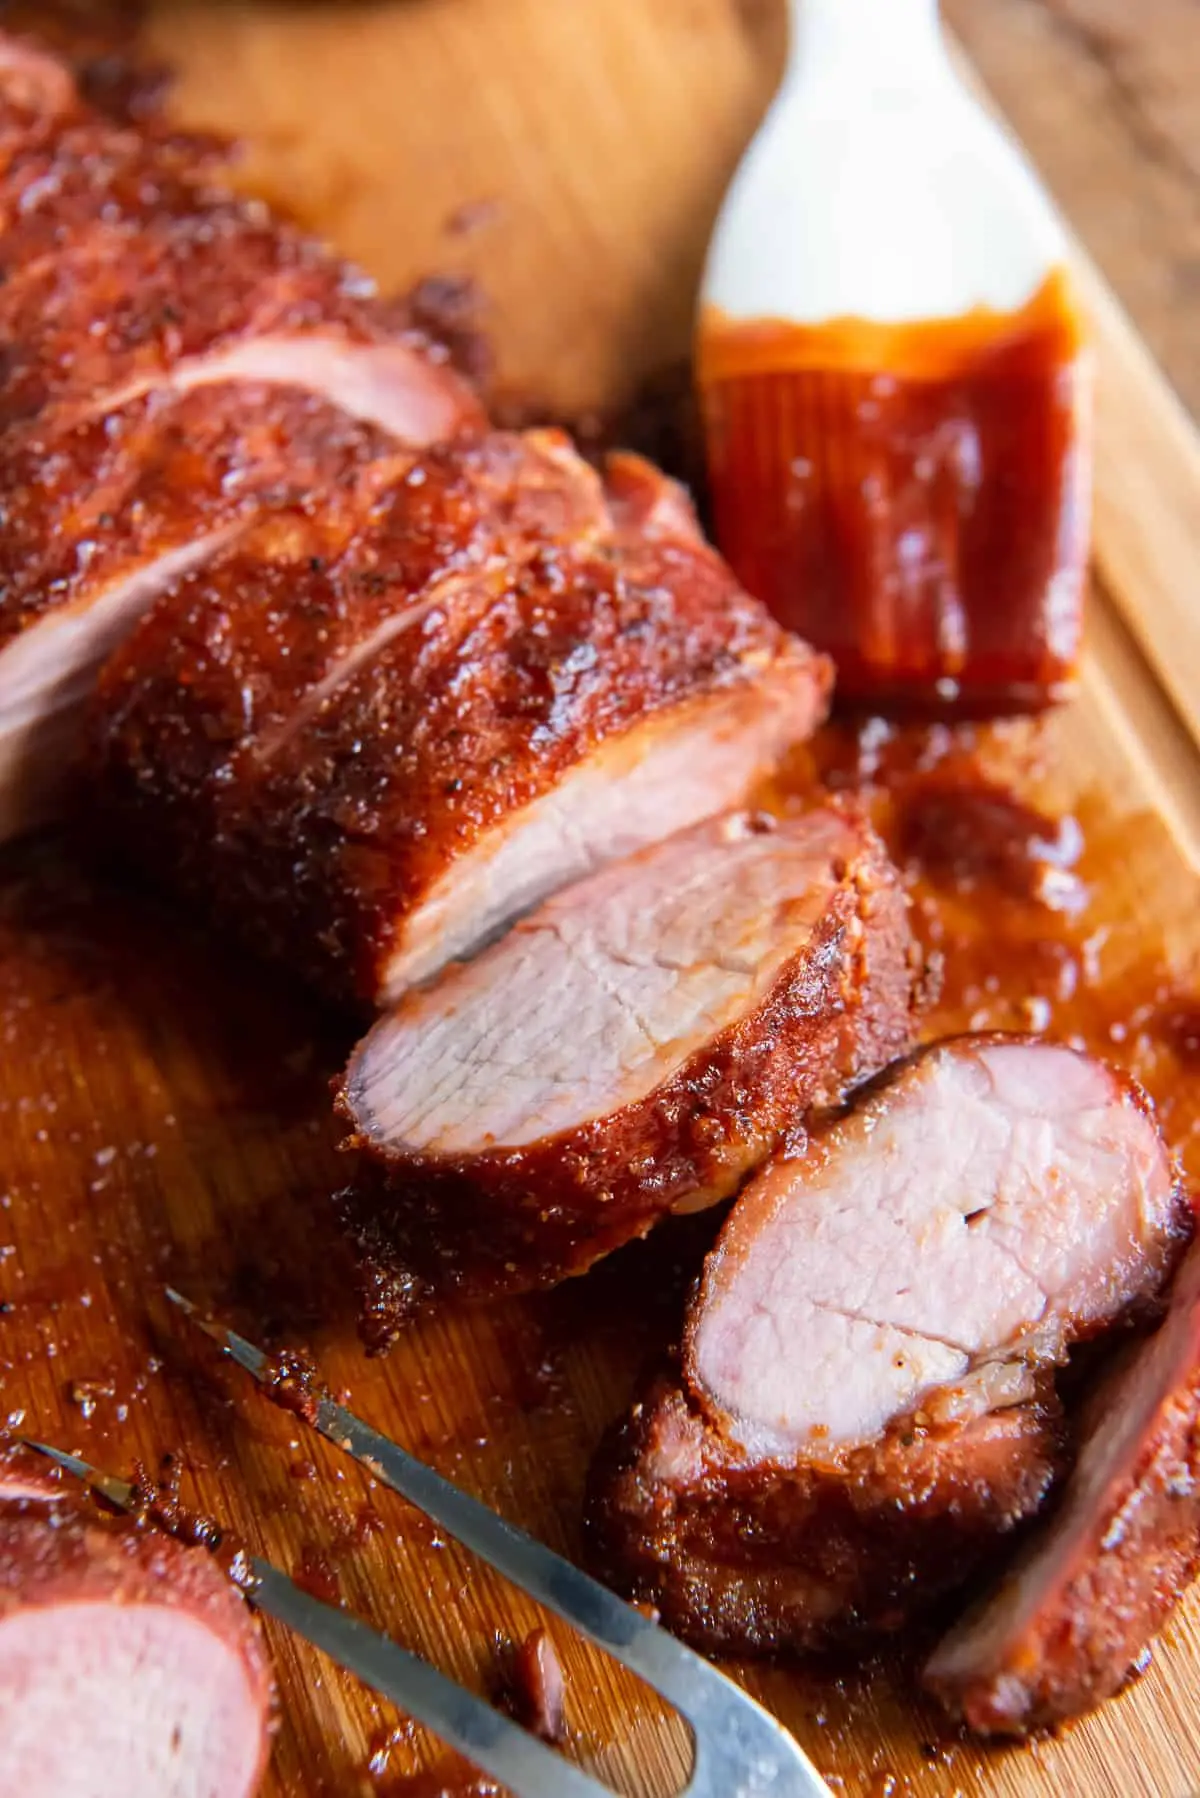 sauce for smoked pork loin - What flavors go well with pork